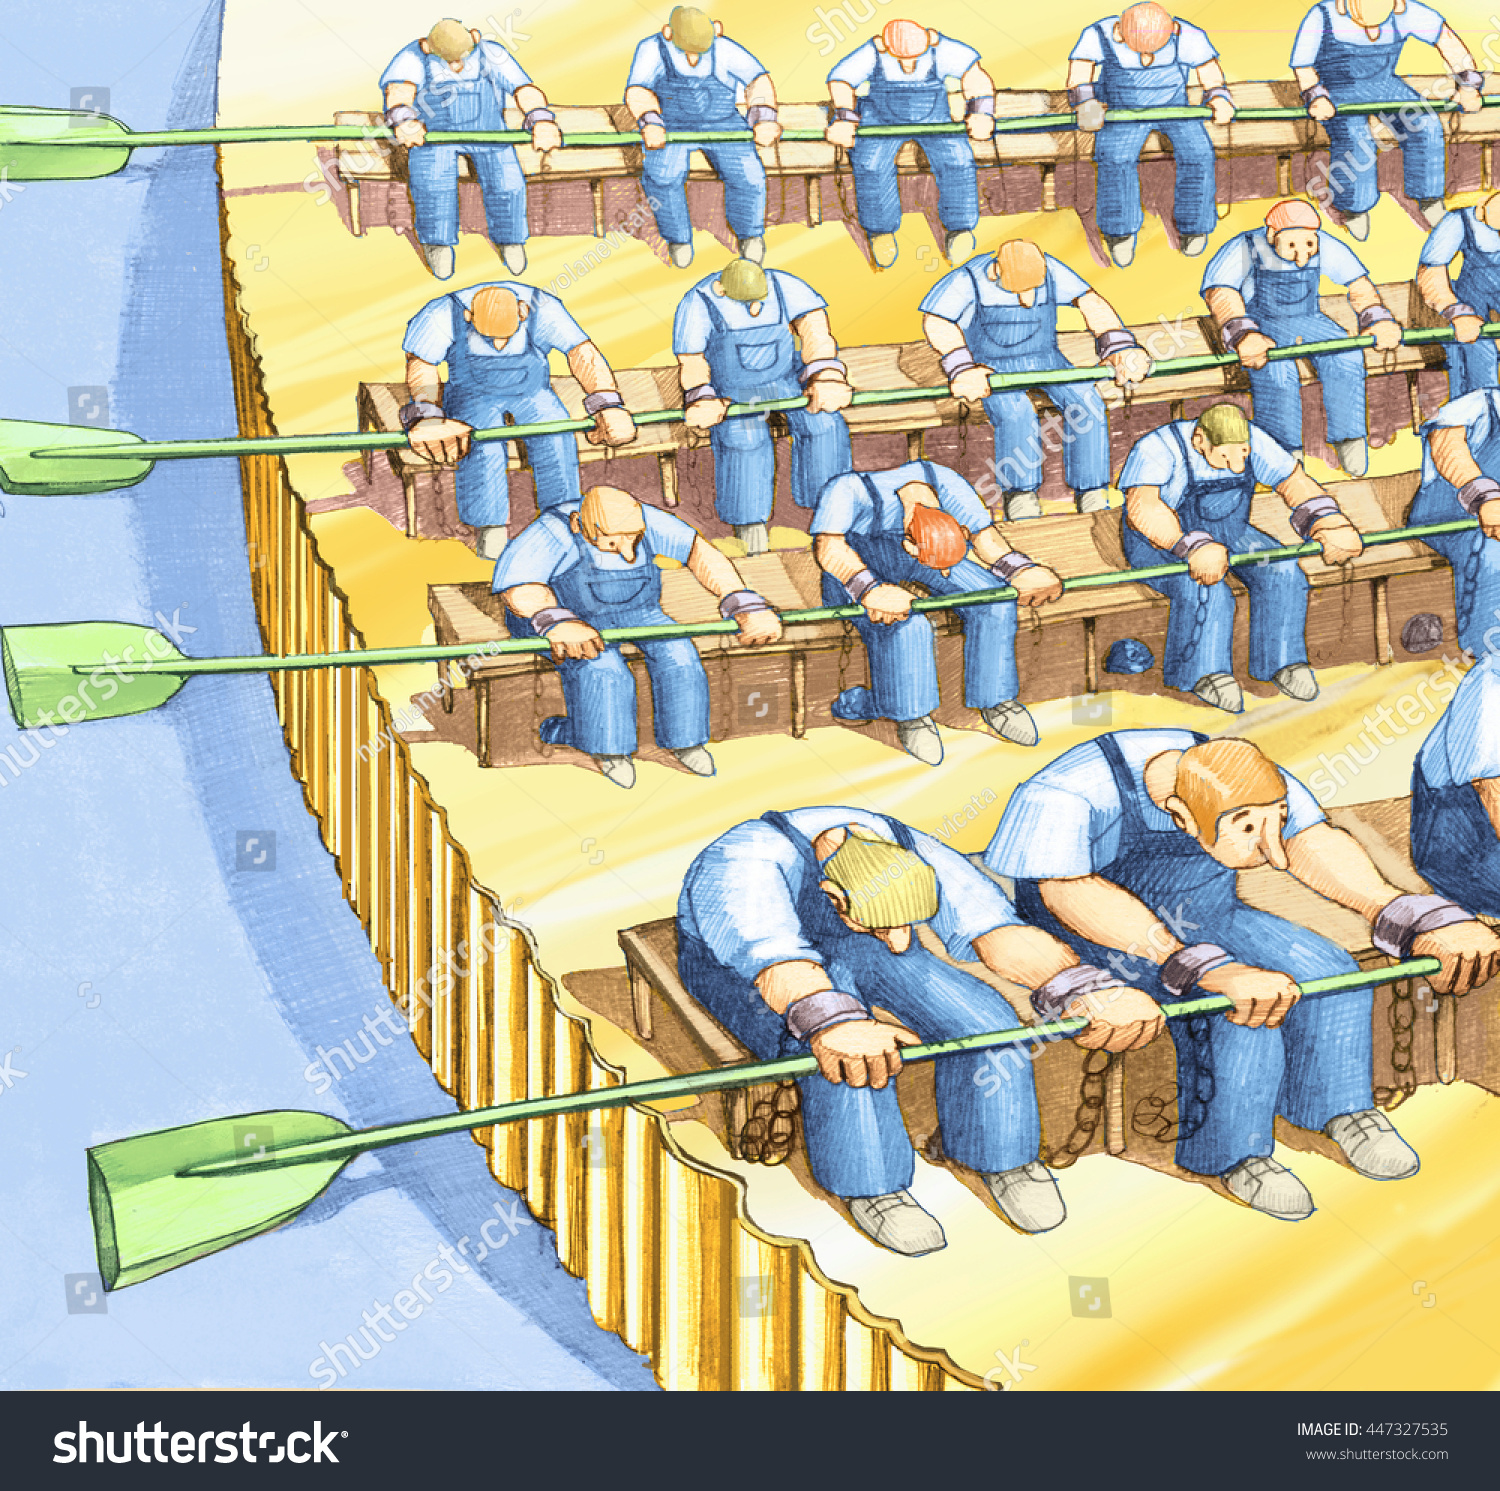 Galley Slave Images Stock Photos Vectors Shutterstock